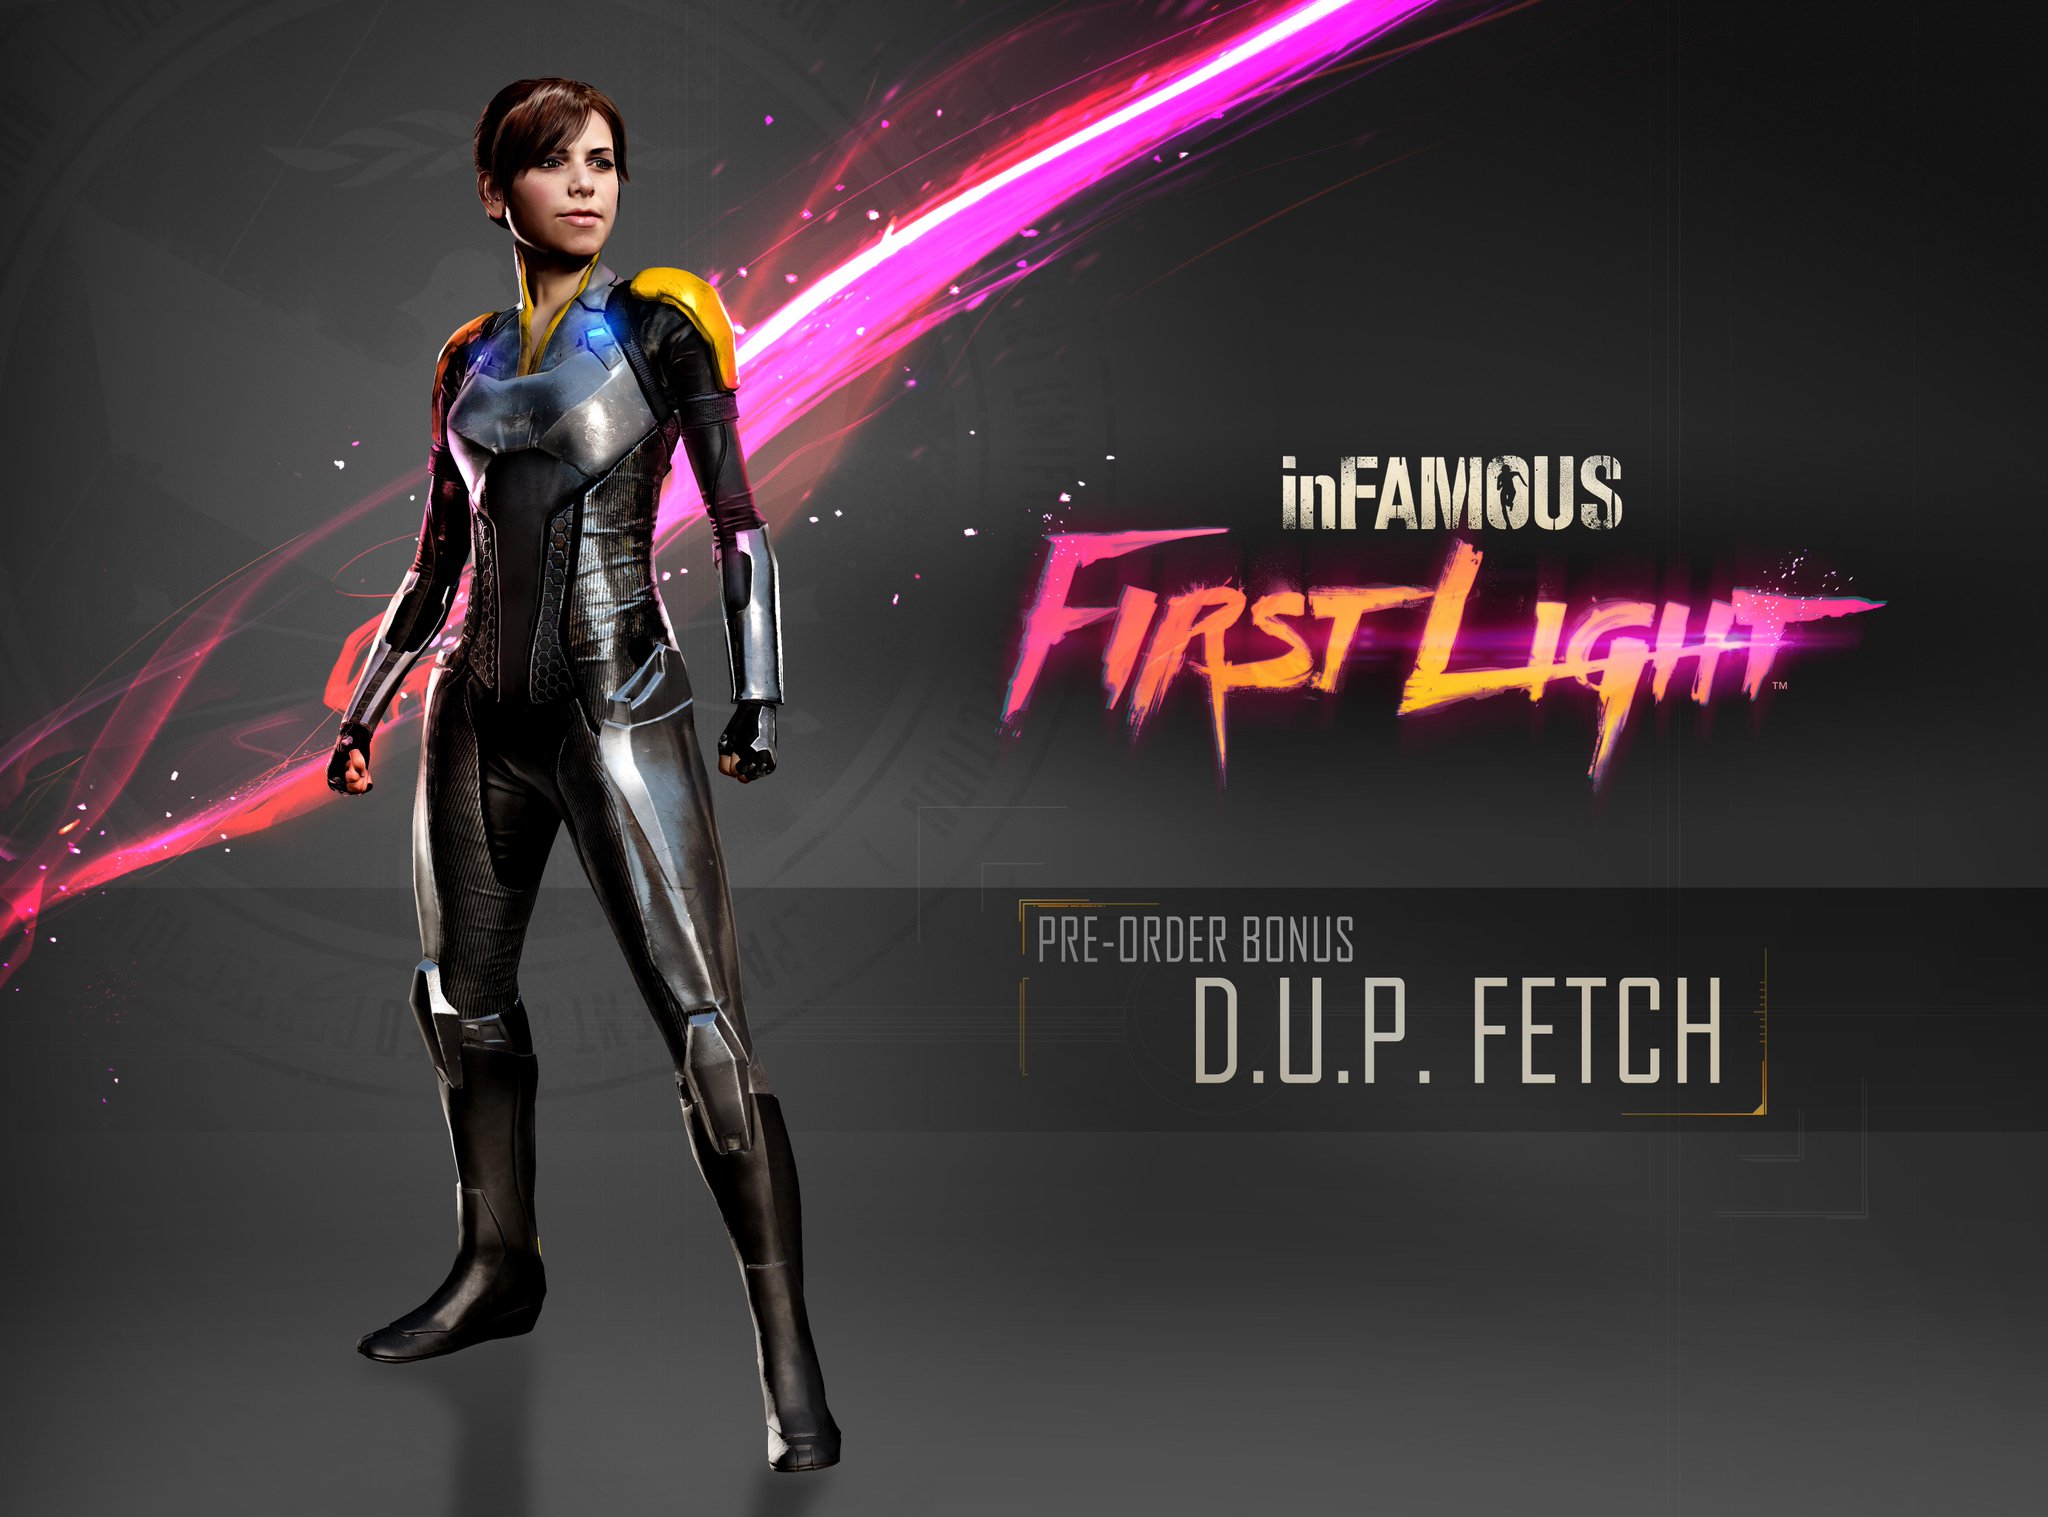 Korrespondent Bortset Kollegium PlayStation Europe on Twitter: "This is so Fetch. Check out the D.U.P Fetch  pre-order bonus for inFAMOUS First Light &gt; http://t.co/99cD83459b  http://t.co/g8XFdhdXV4" / Twitter